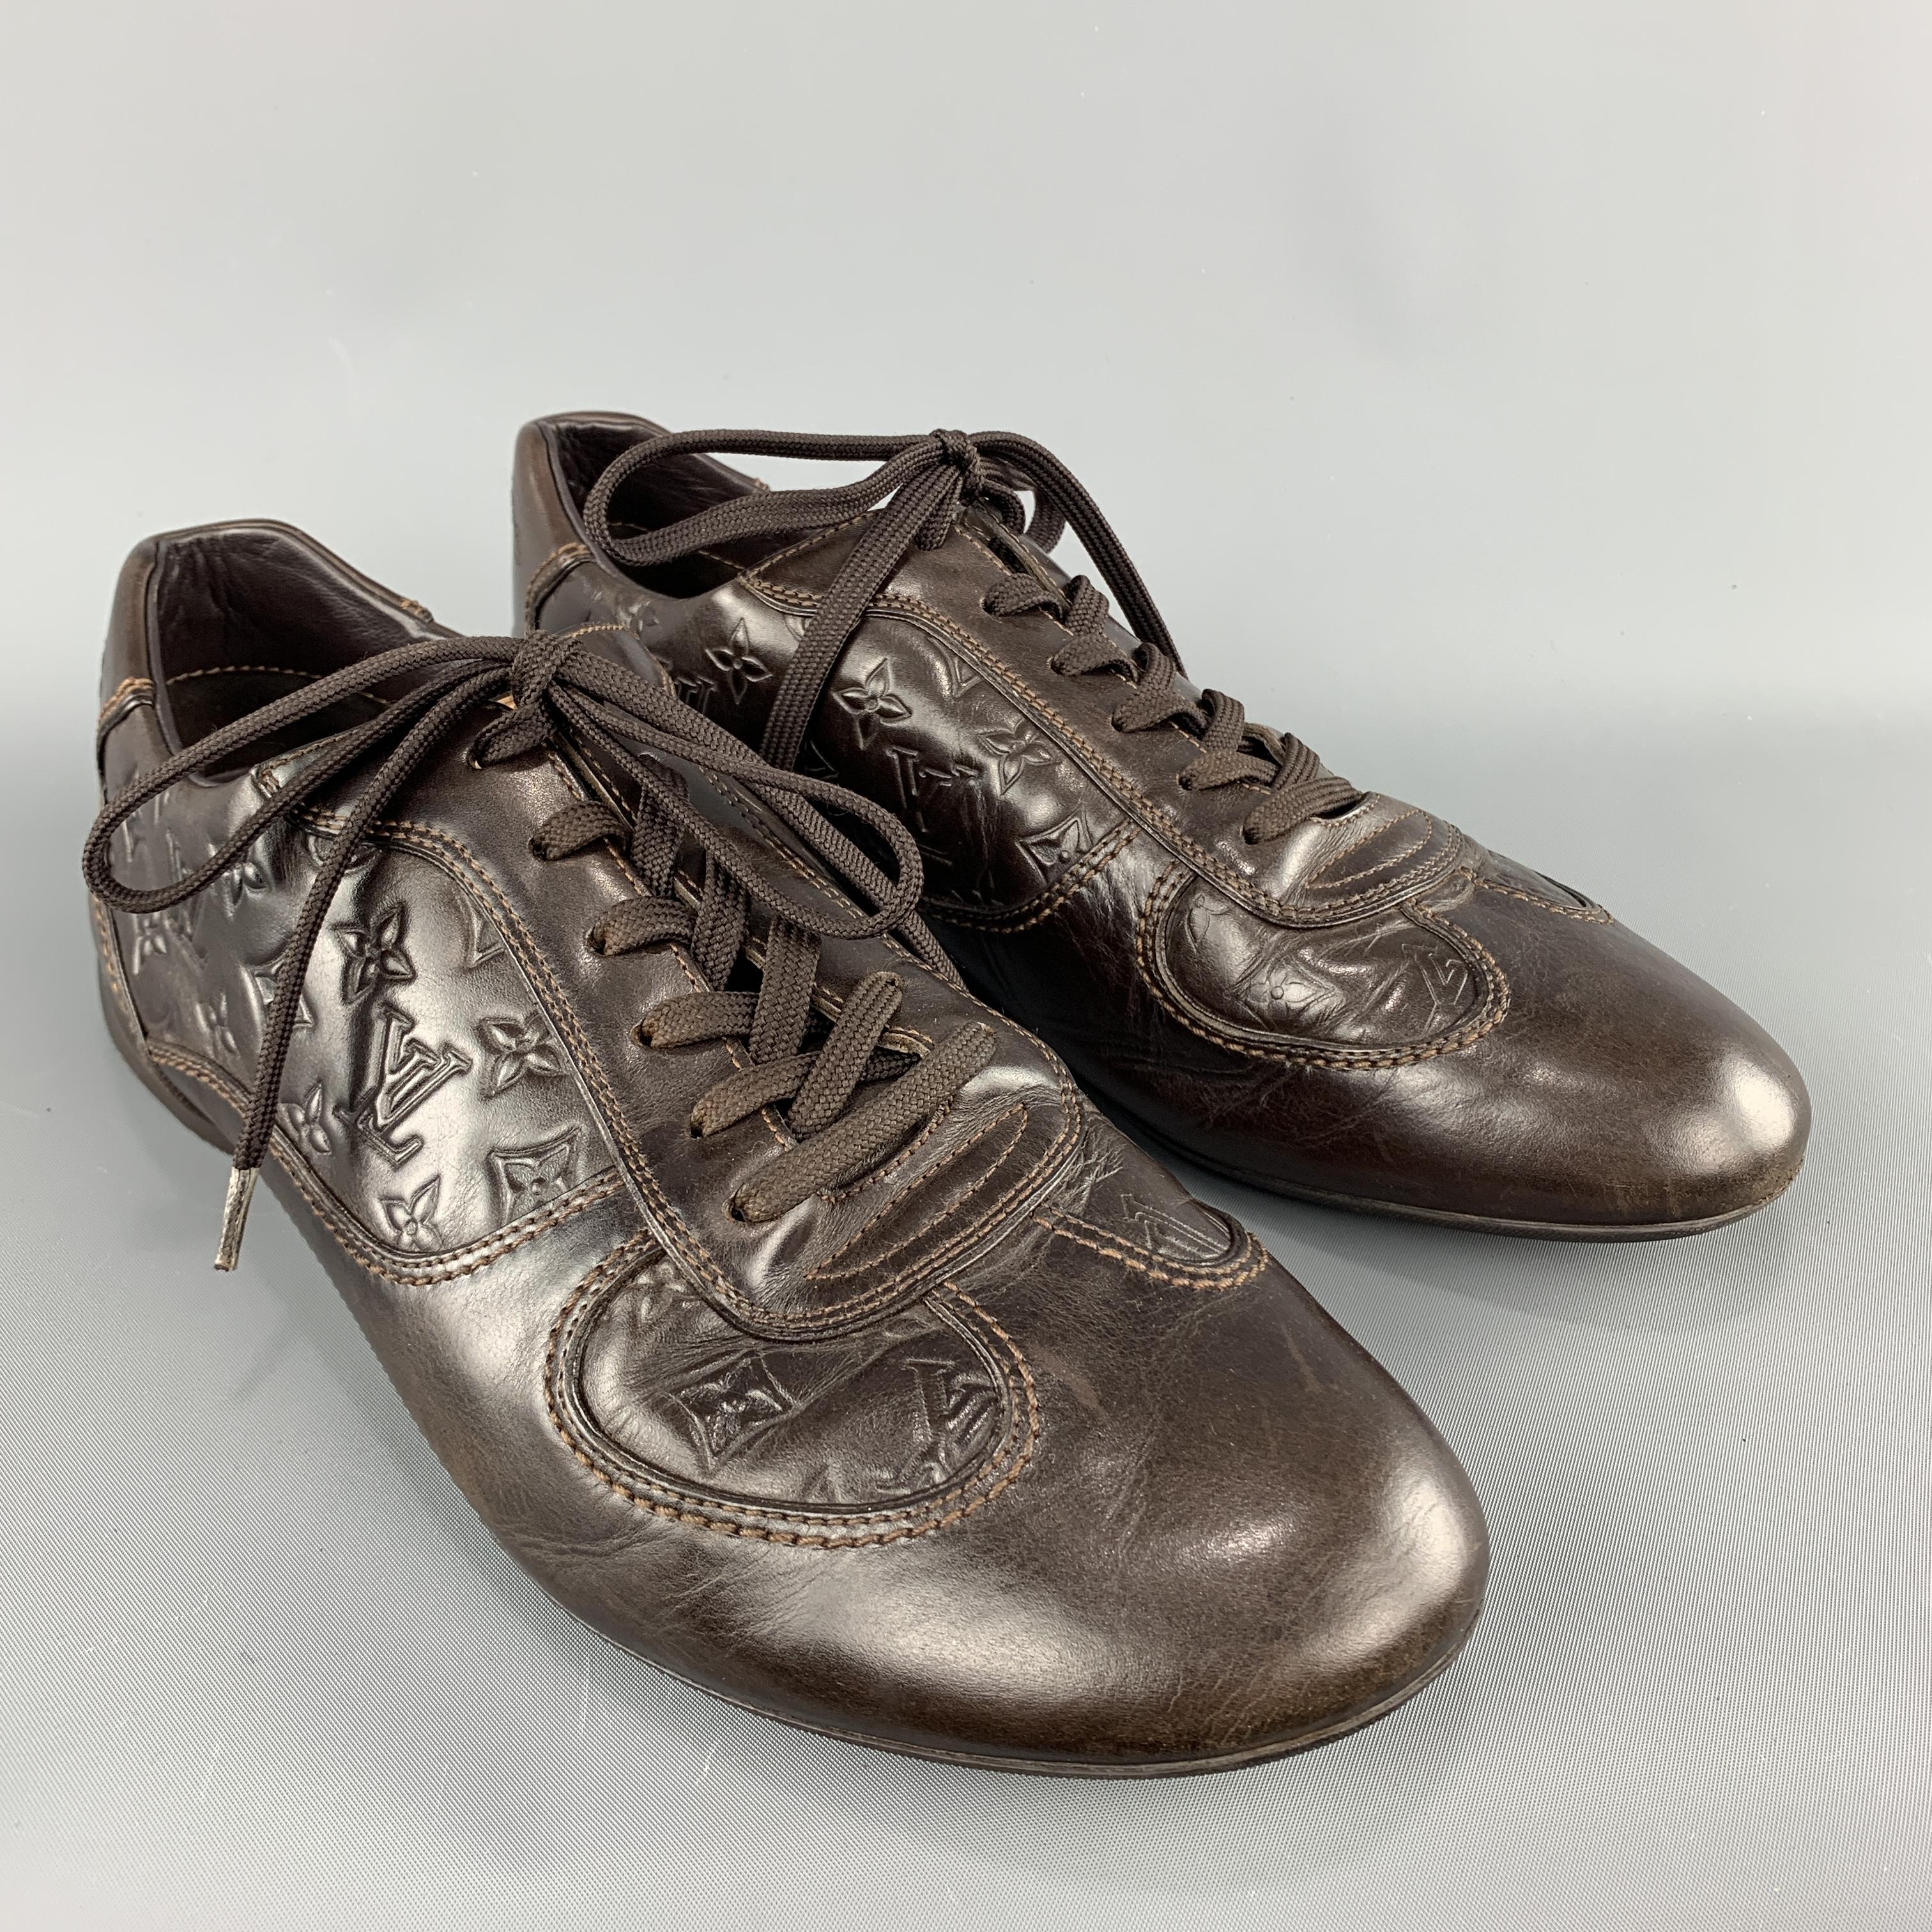 LOUIS VUITTON low top sneakers come in chocolate brown leather with monogram embossed panels, lace up front, and embroidered heel. Made in Italy.
 
Very Good Pre-Owned Condition.
Marked: UK 8.5
 
Outsole: 11 x 3.5 in.